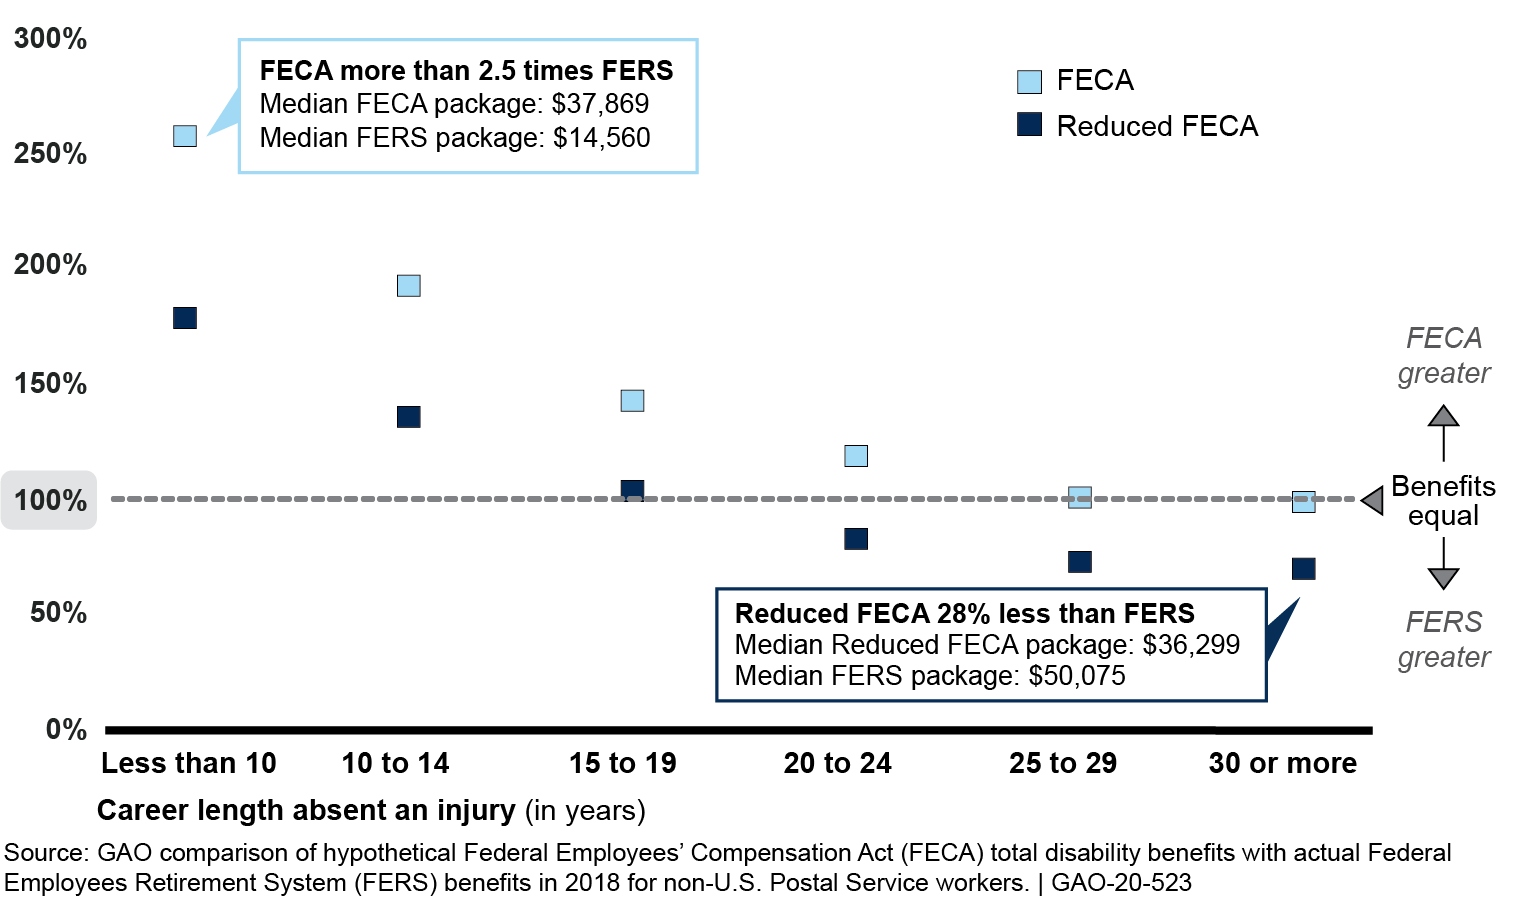 Median FECA Benefits as a Percentage of FERS Benefits by Career Length Absent an Injury